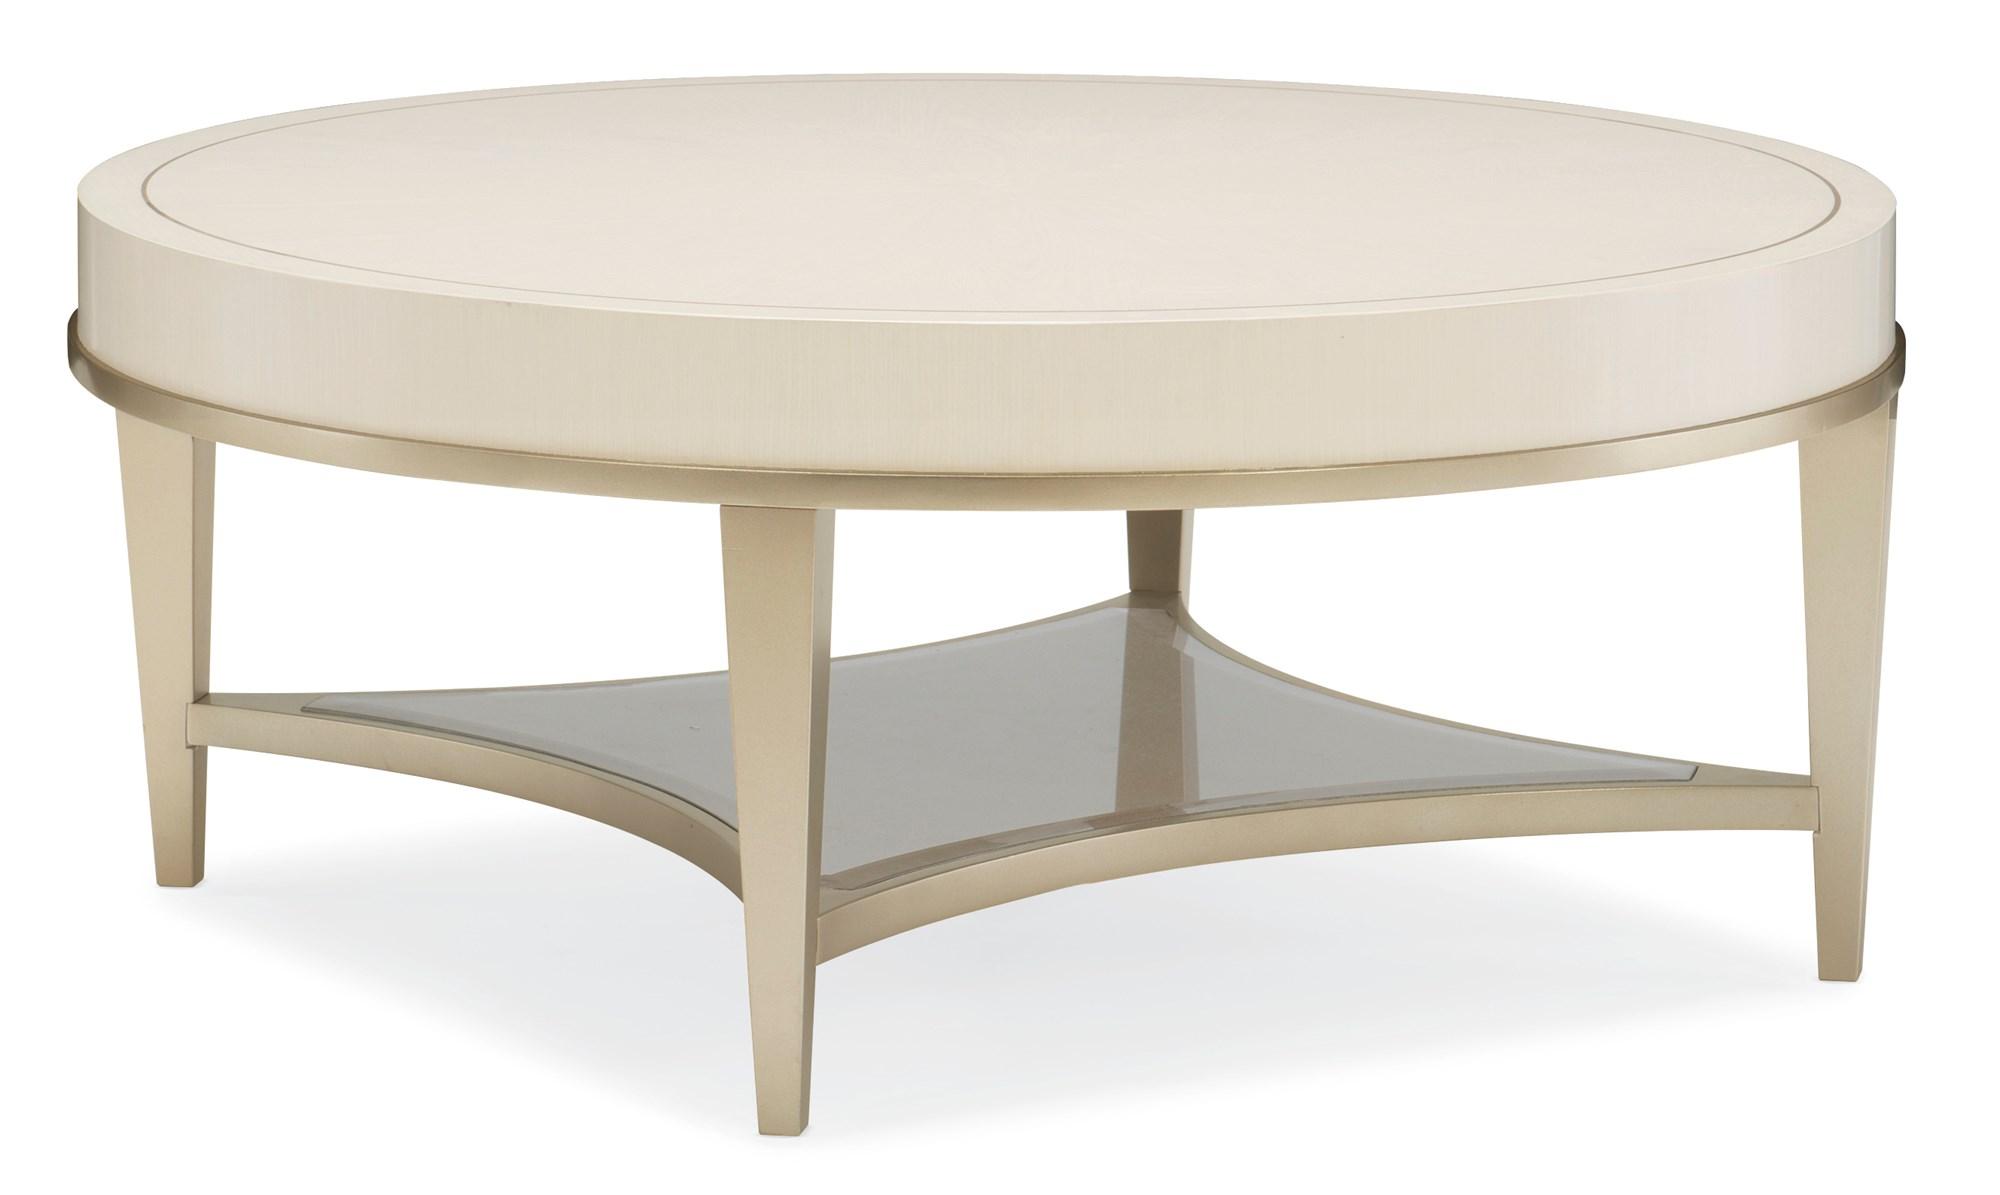 Contemporary Cocktail Table ADELA COCKTAIL TABLE C011-016-401 in Off-White, Taupe 